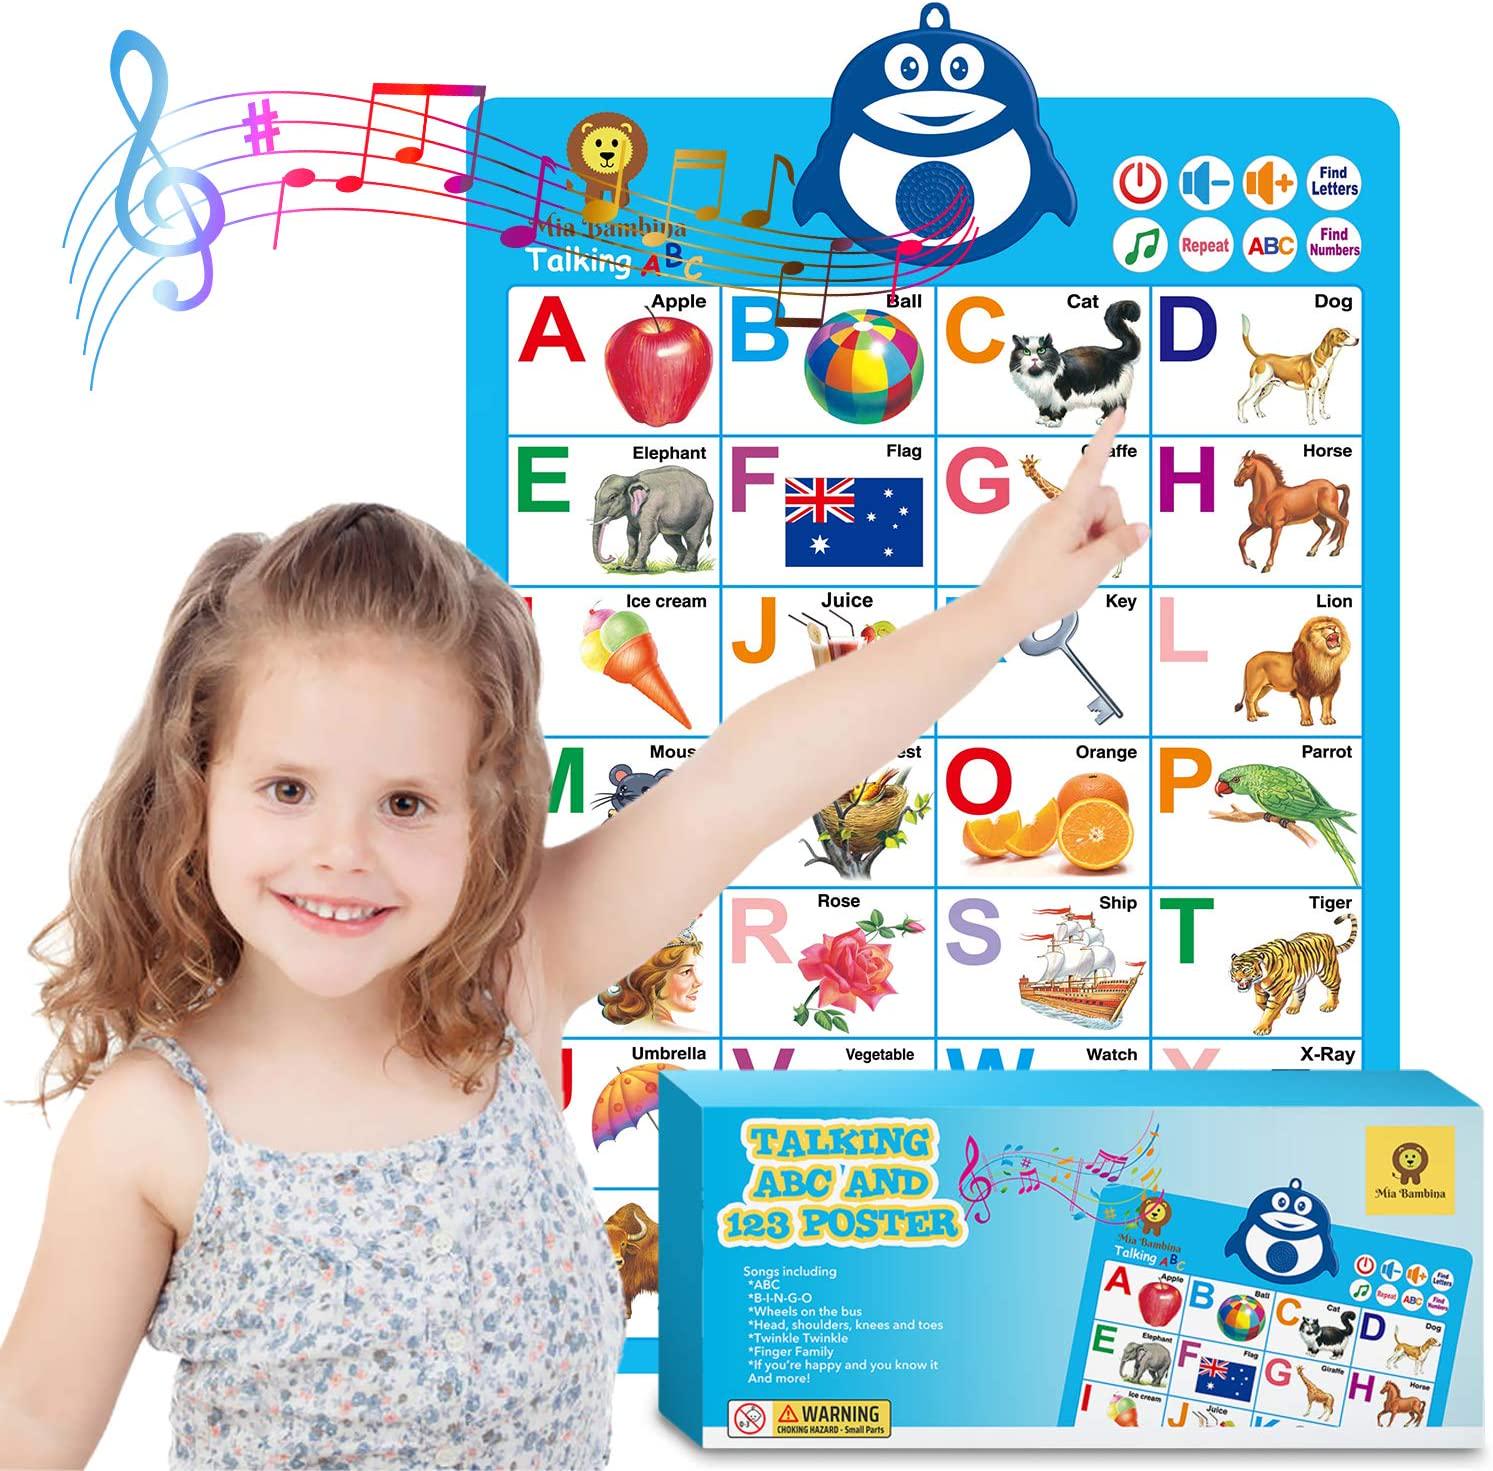 Mia Bambina, Mia Bambina Educational Toys for Toddlers - Electronic ABC Poster | Teaches Tactile Memory, Word Association and Counting | Songs, Intuitive Buttons | Easy to Clean and Durable